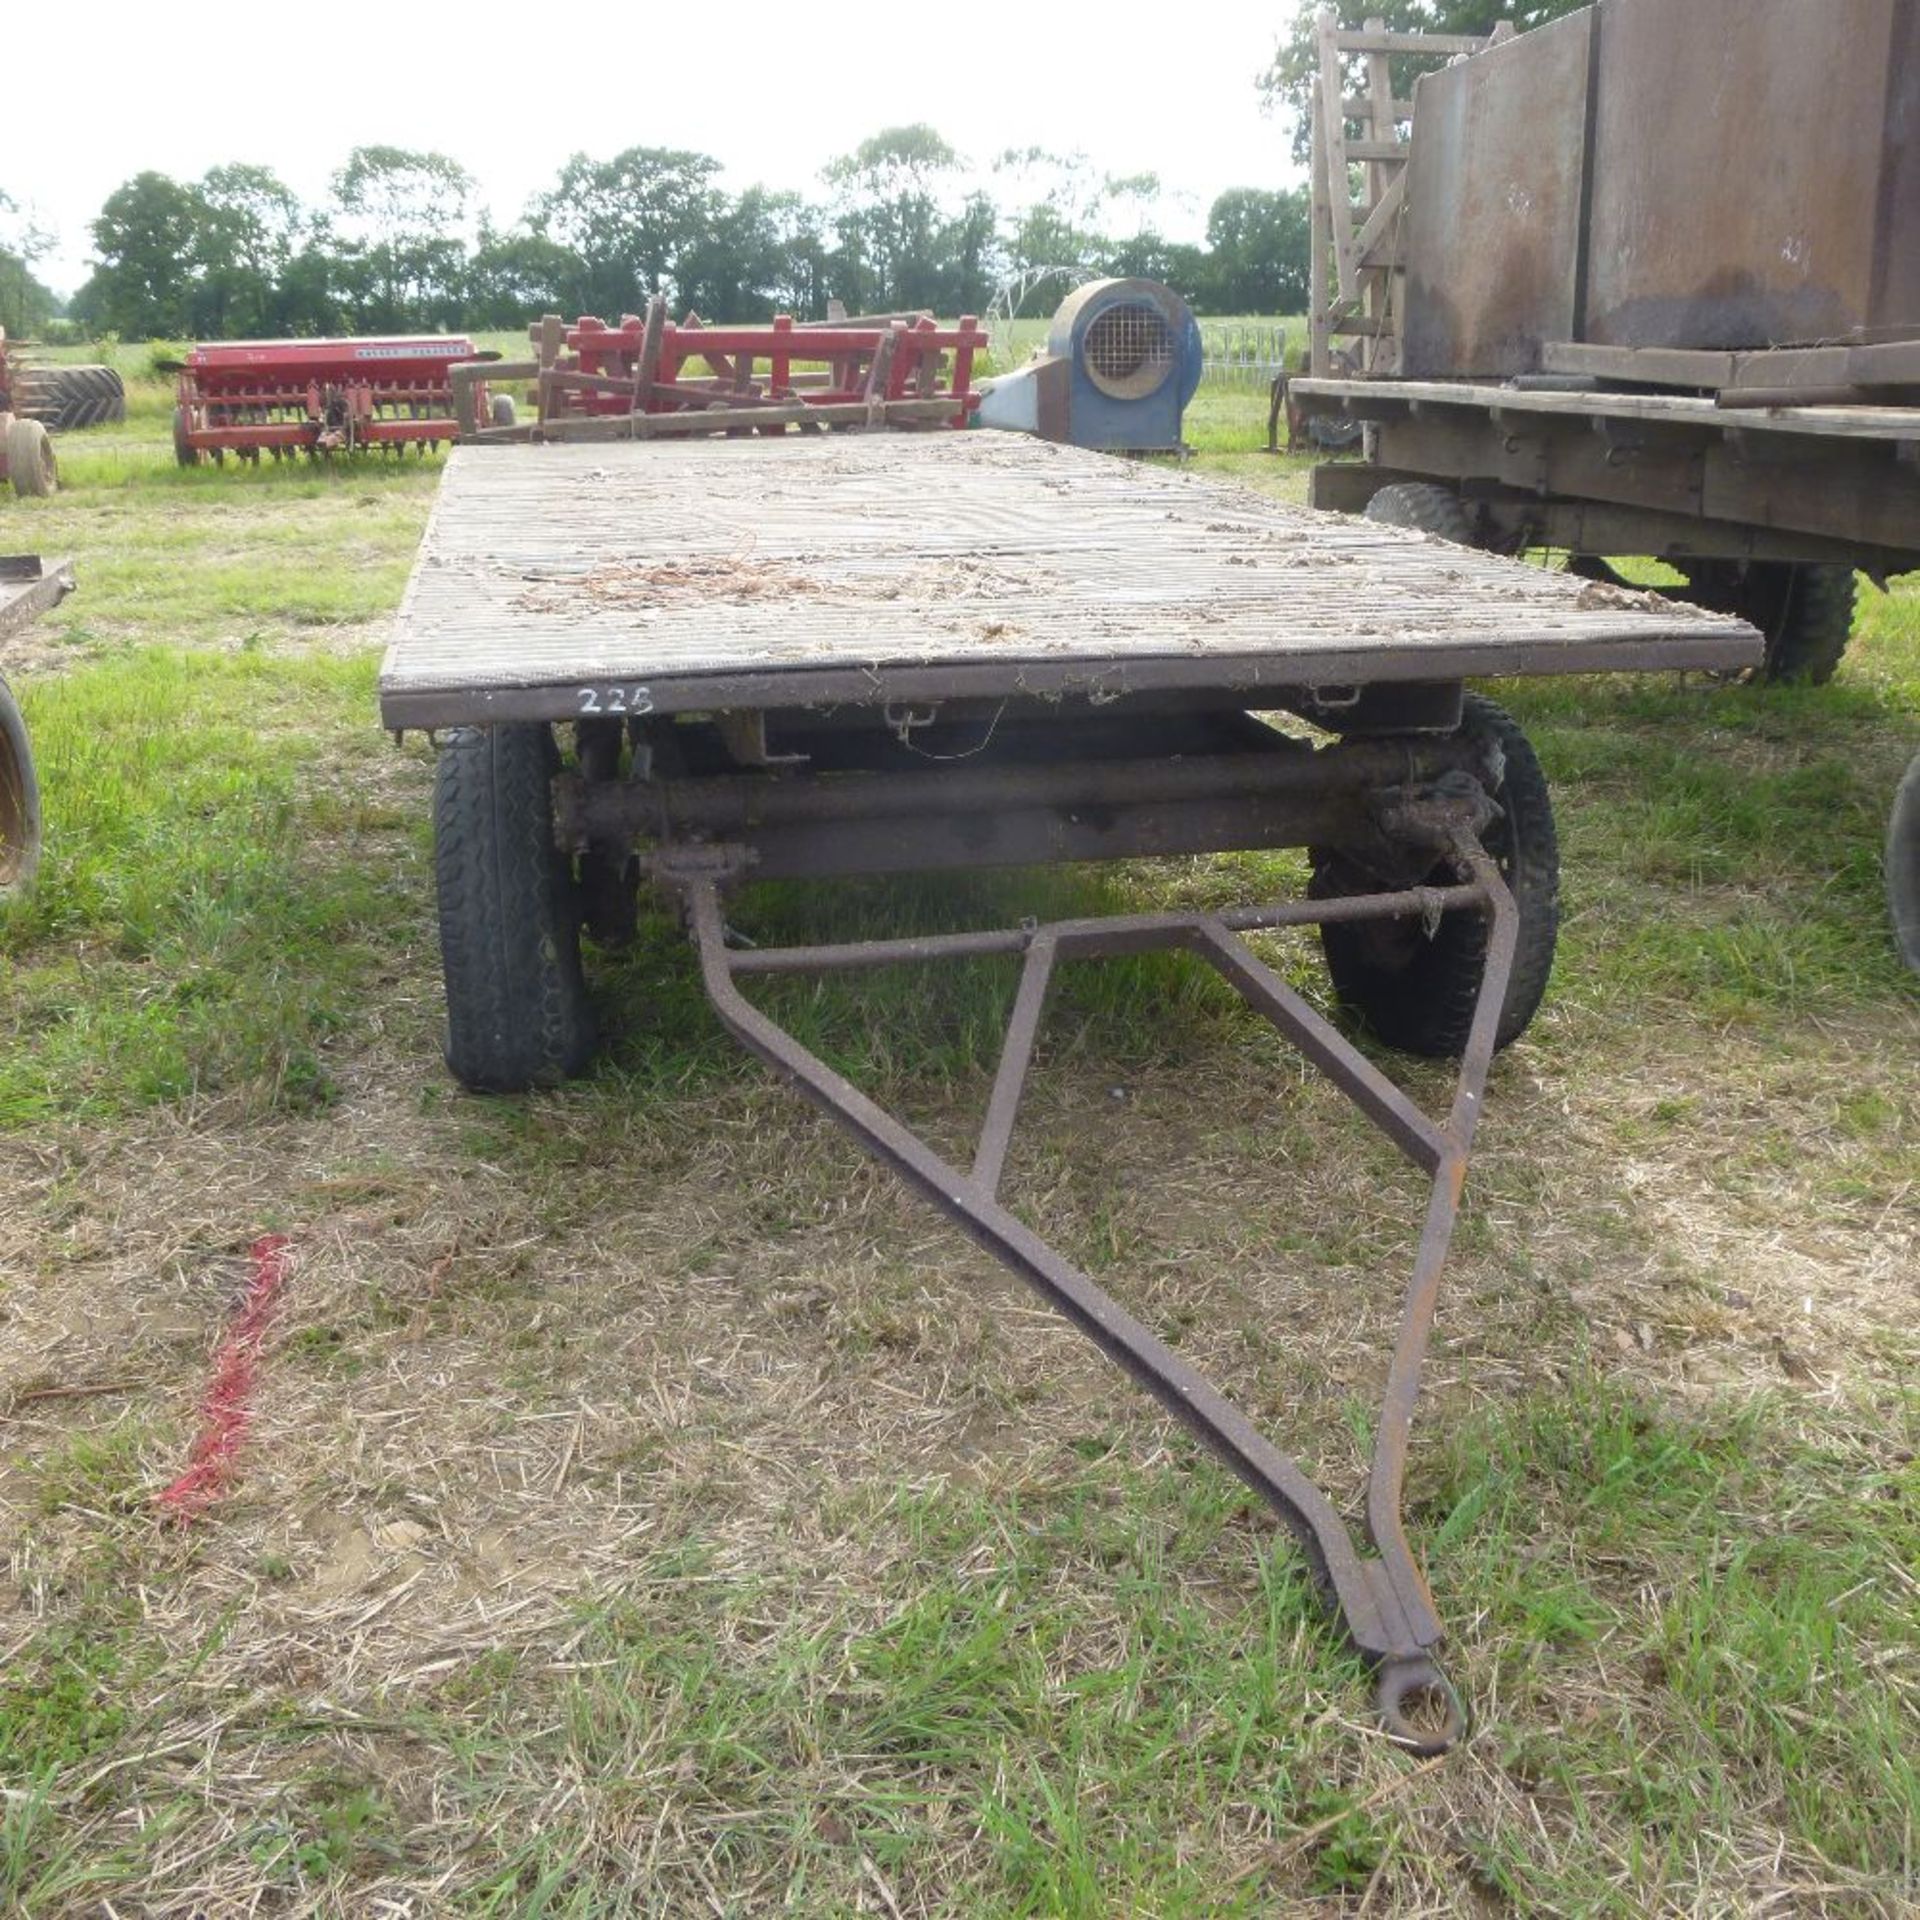 4 wheel straw trailer with corrugated metal floor